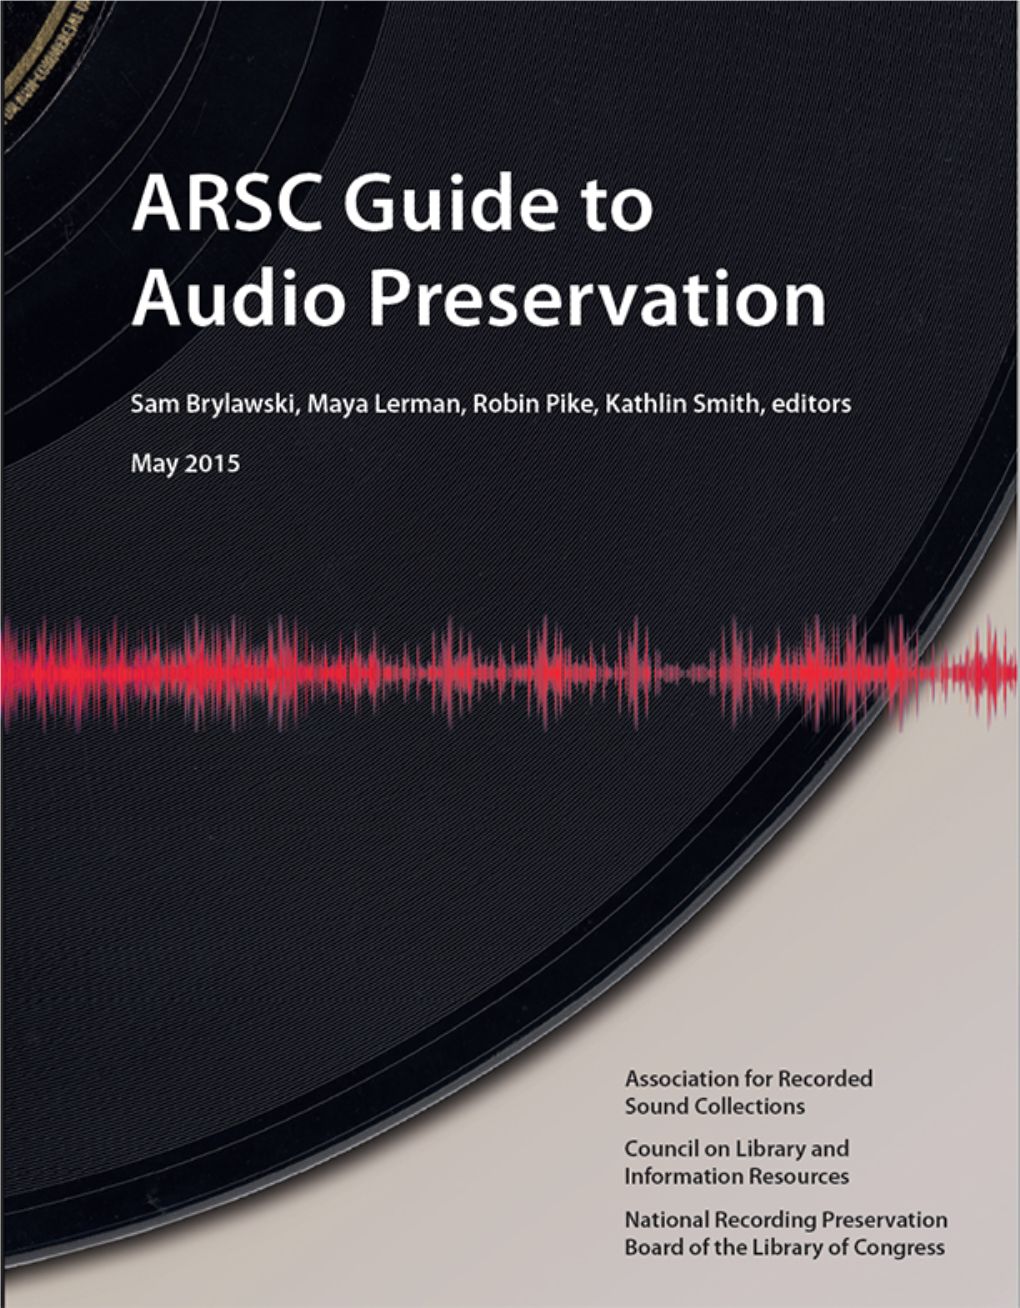 ARSC Guide to Audio Preservation